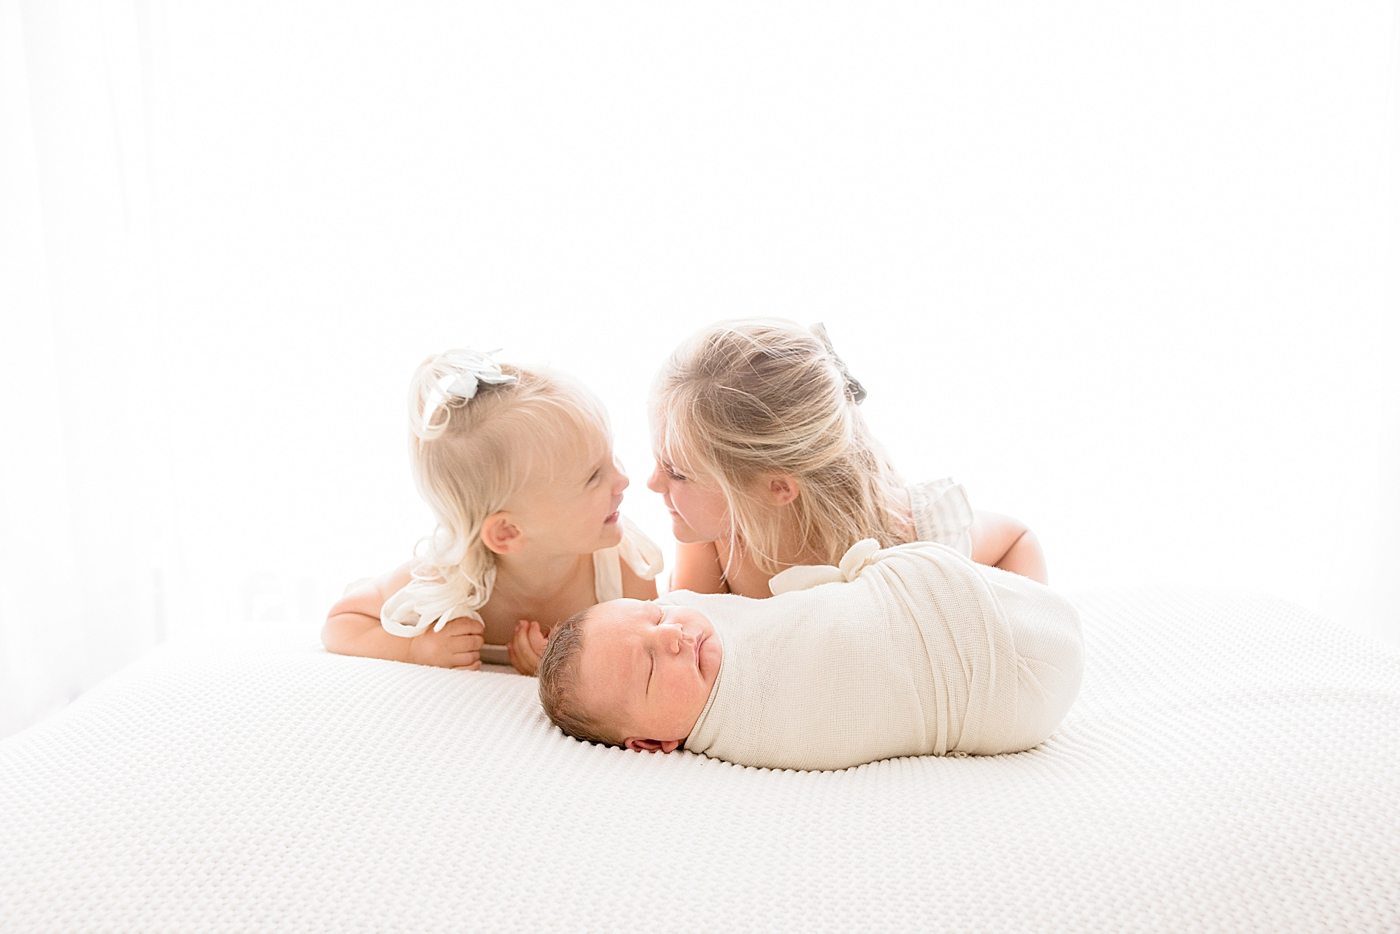 Big sisters snuggling with their new baby brother | Image by Halleigh Hill